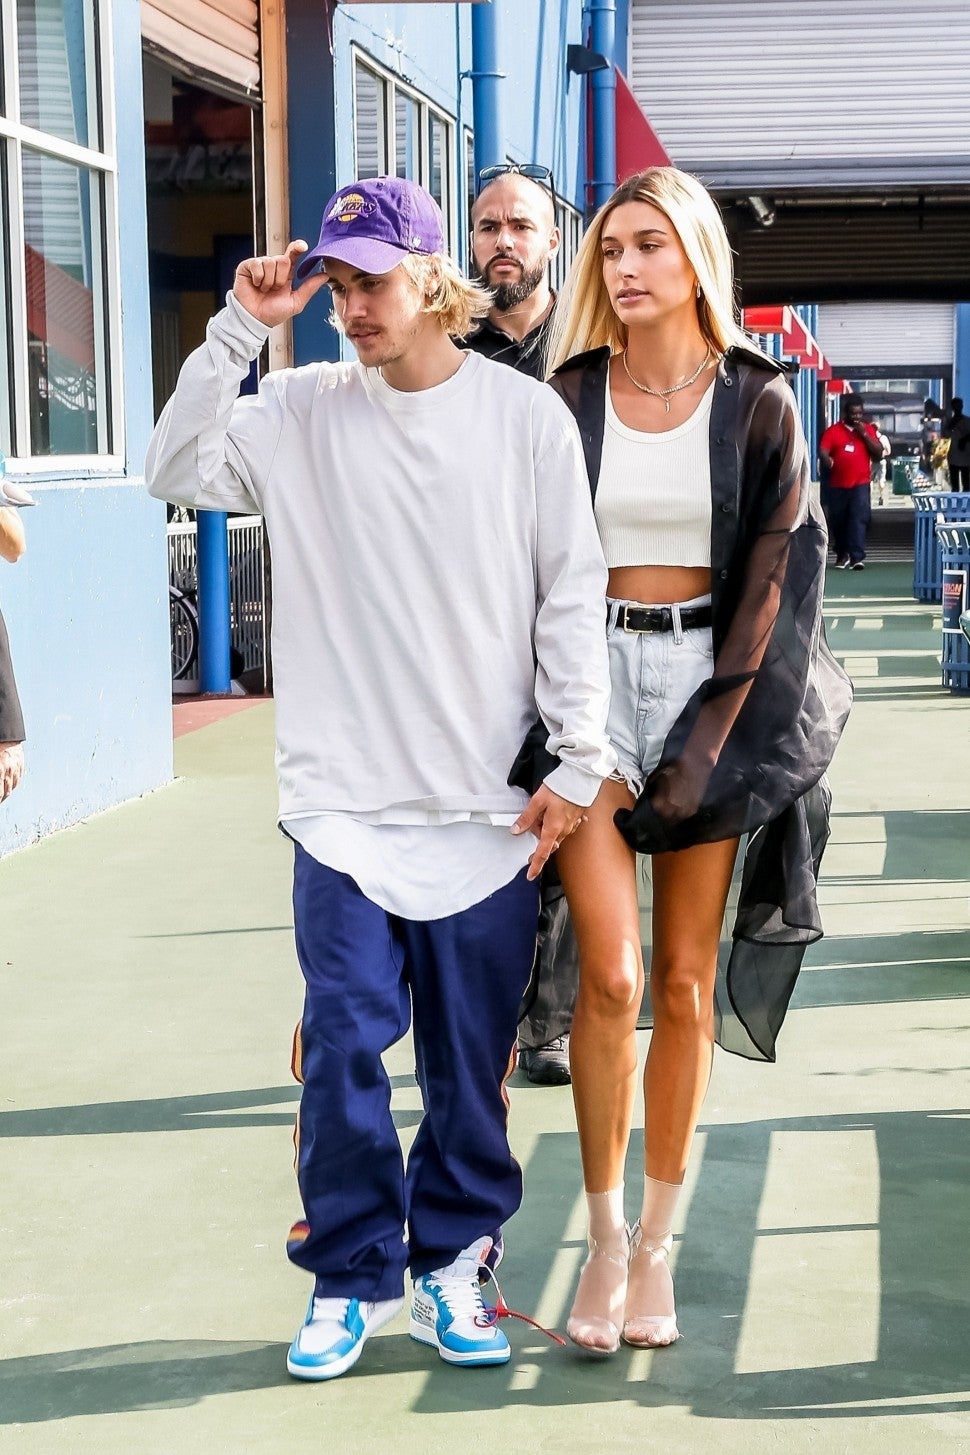 Hailey Baldwin And Justin Bieber Attend Their First Fashion Show Together As An Engaged Couple Entertainment Tonight